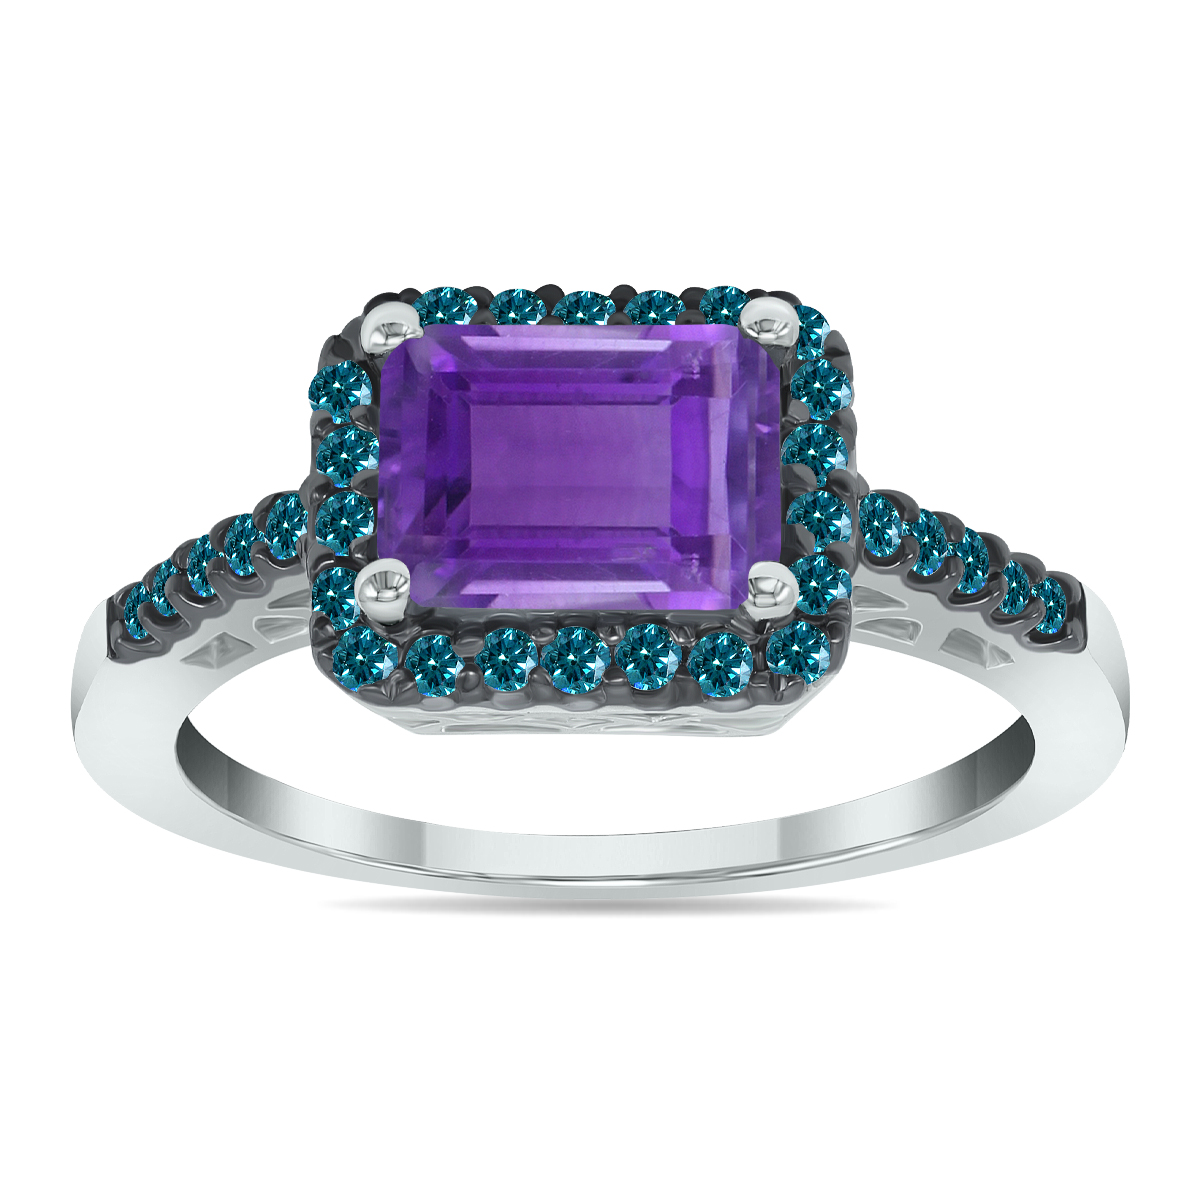 2 1/2 Carat Emerald Cut Amethyst and 1/3 CTW Blue Diamond Ring in 10K White Gold